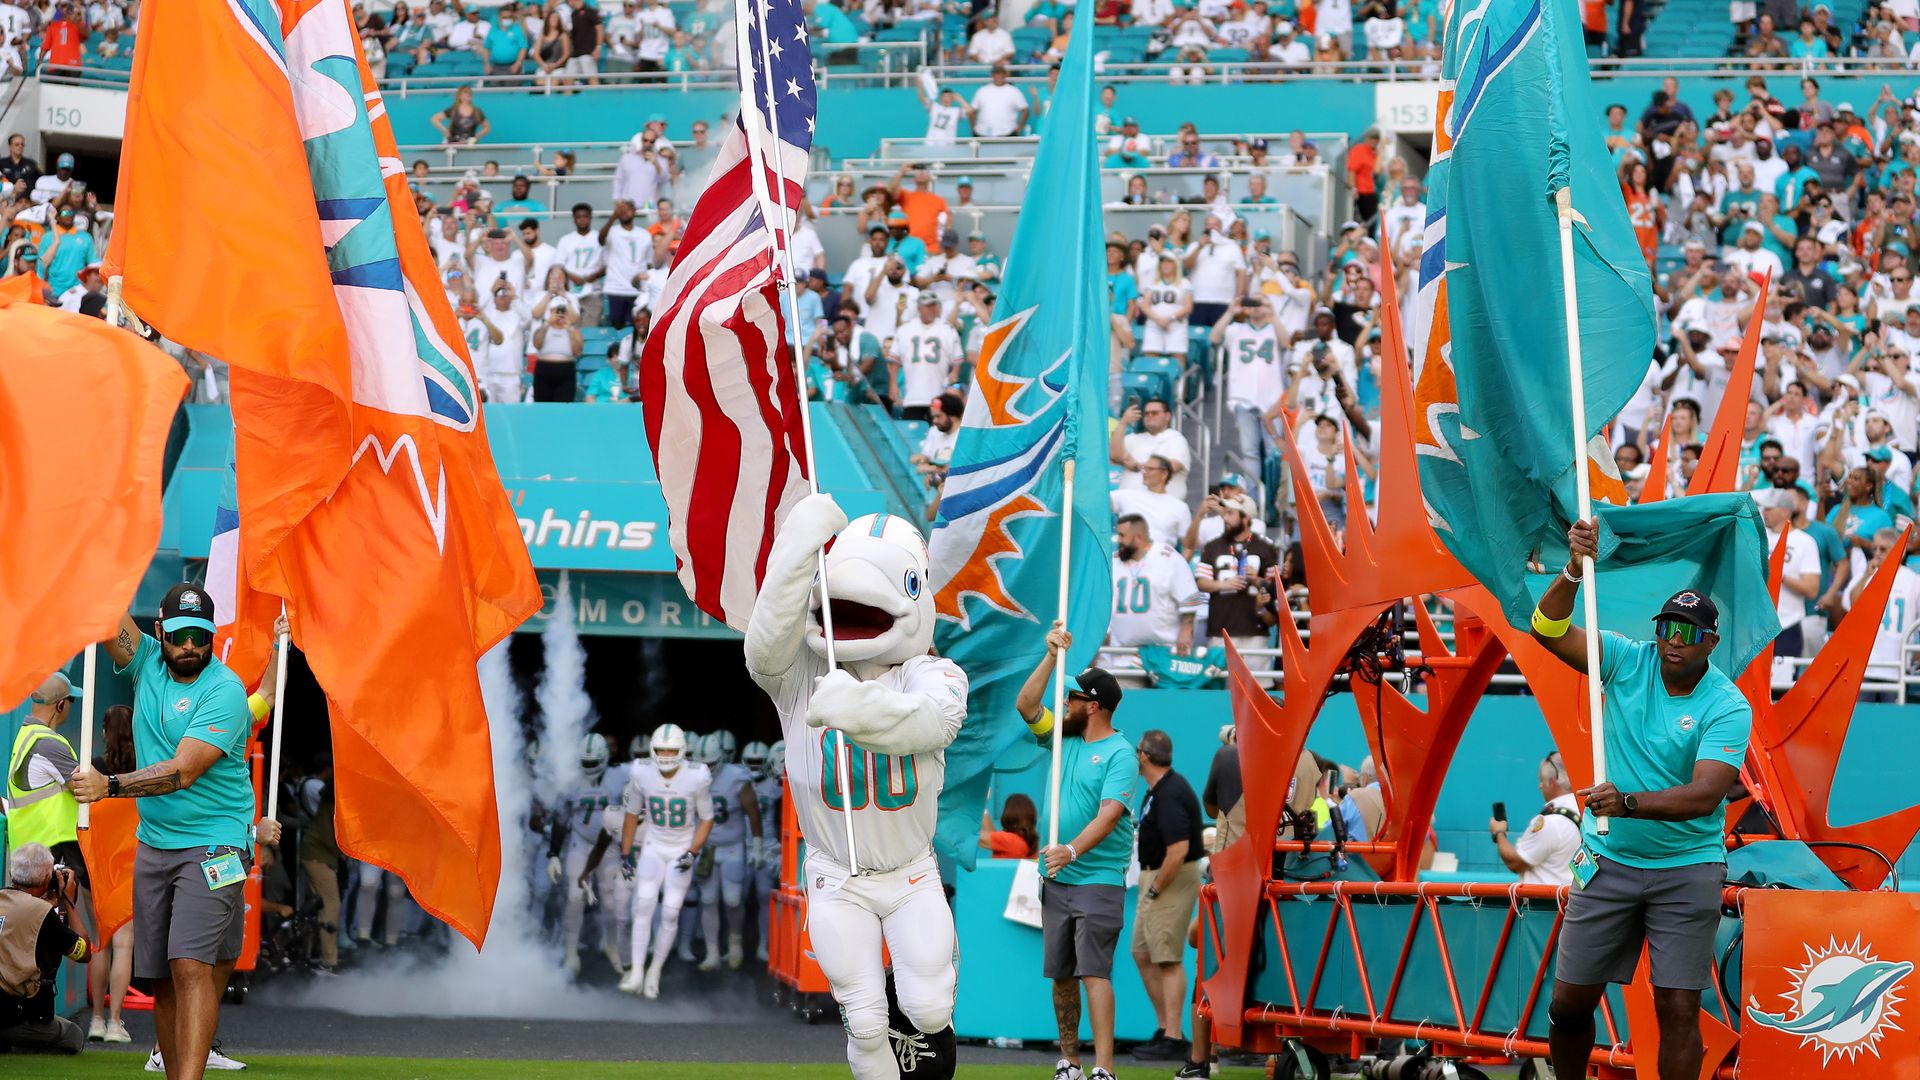 The Miami Dolphins mascot runs onto the field prior to the game against the Cleveland Browns at Hard Rock Stadium on 